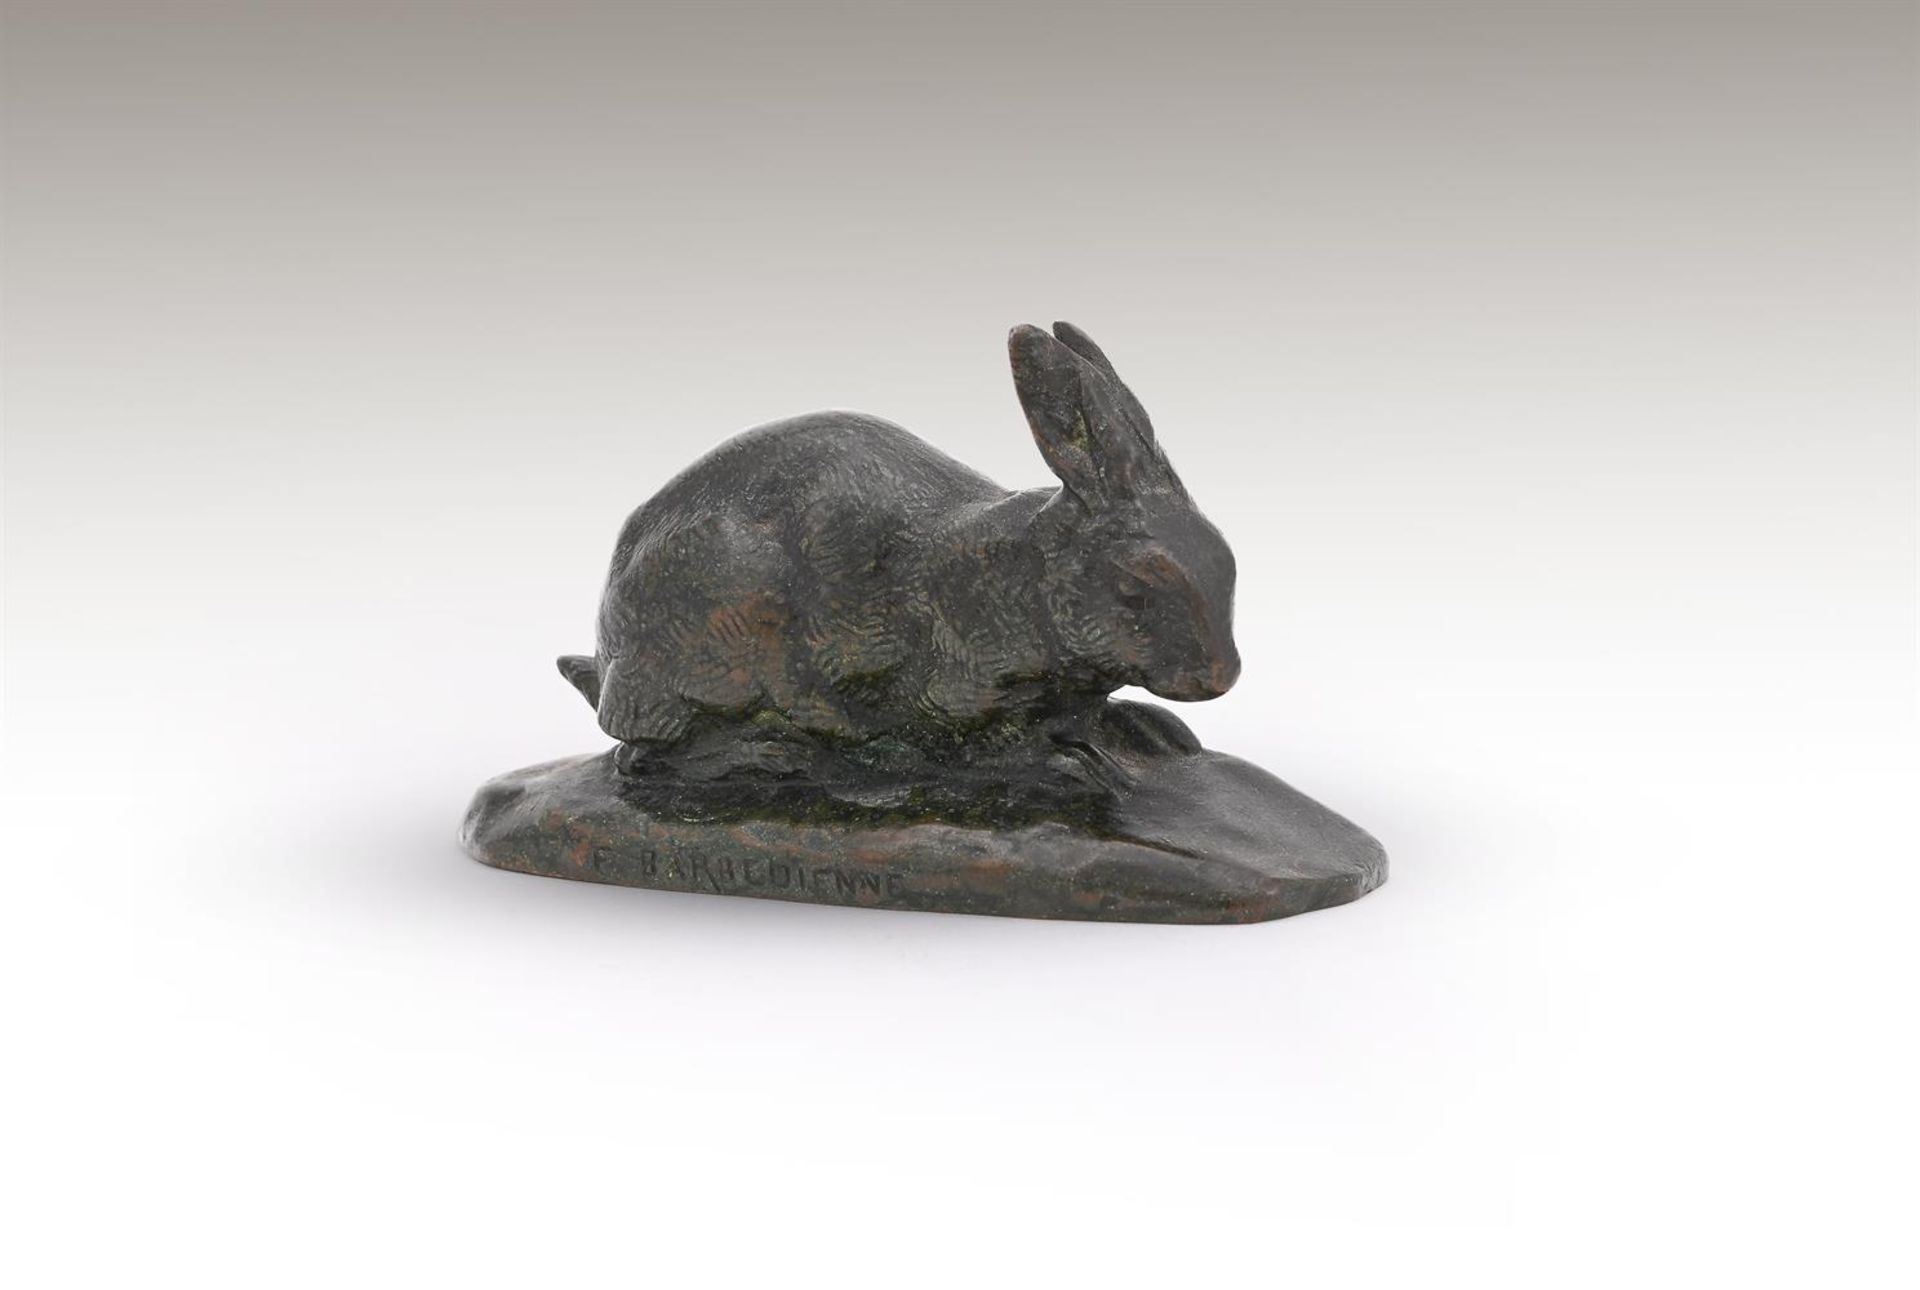 ANTOINE-LOUIS BARYE (FRENCH, 1795-1875), A BRONZE MODEL OF A CROUCHING RABBIT - Image 5 of 5